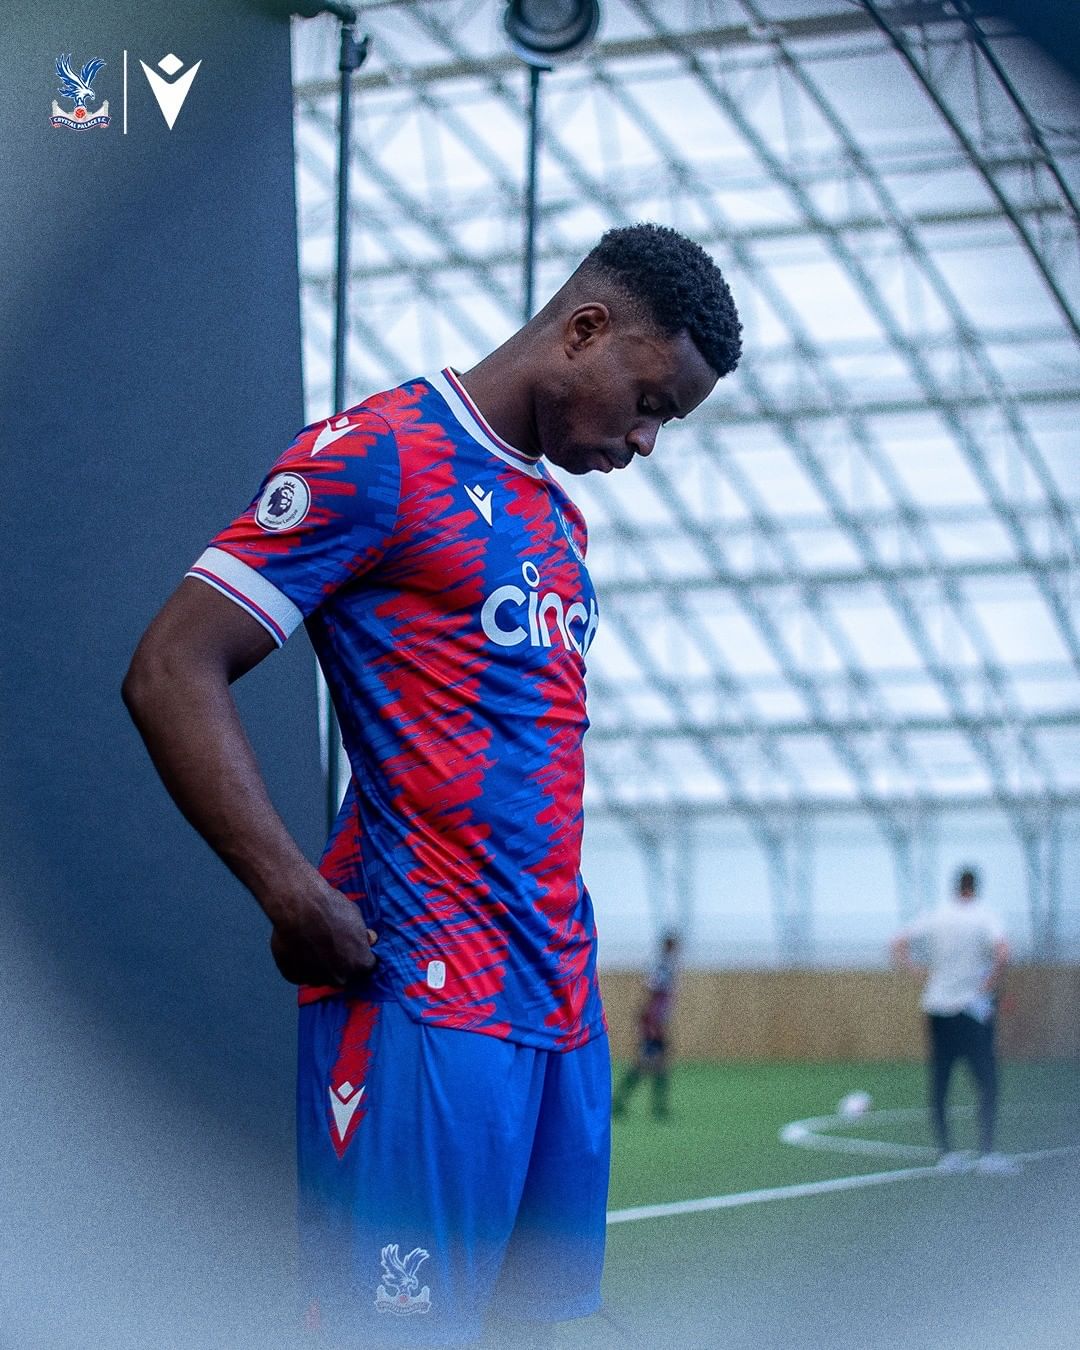 Maillot domicile Crystal Palace 2022-2023